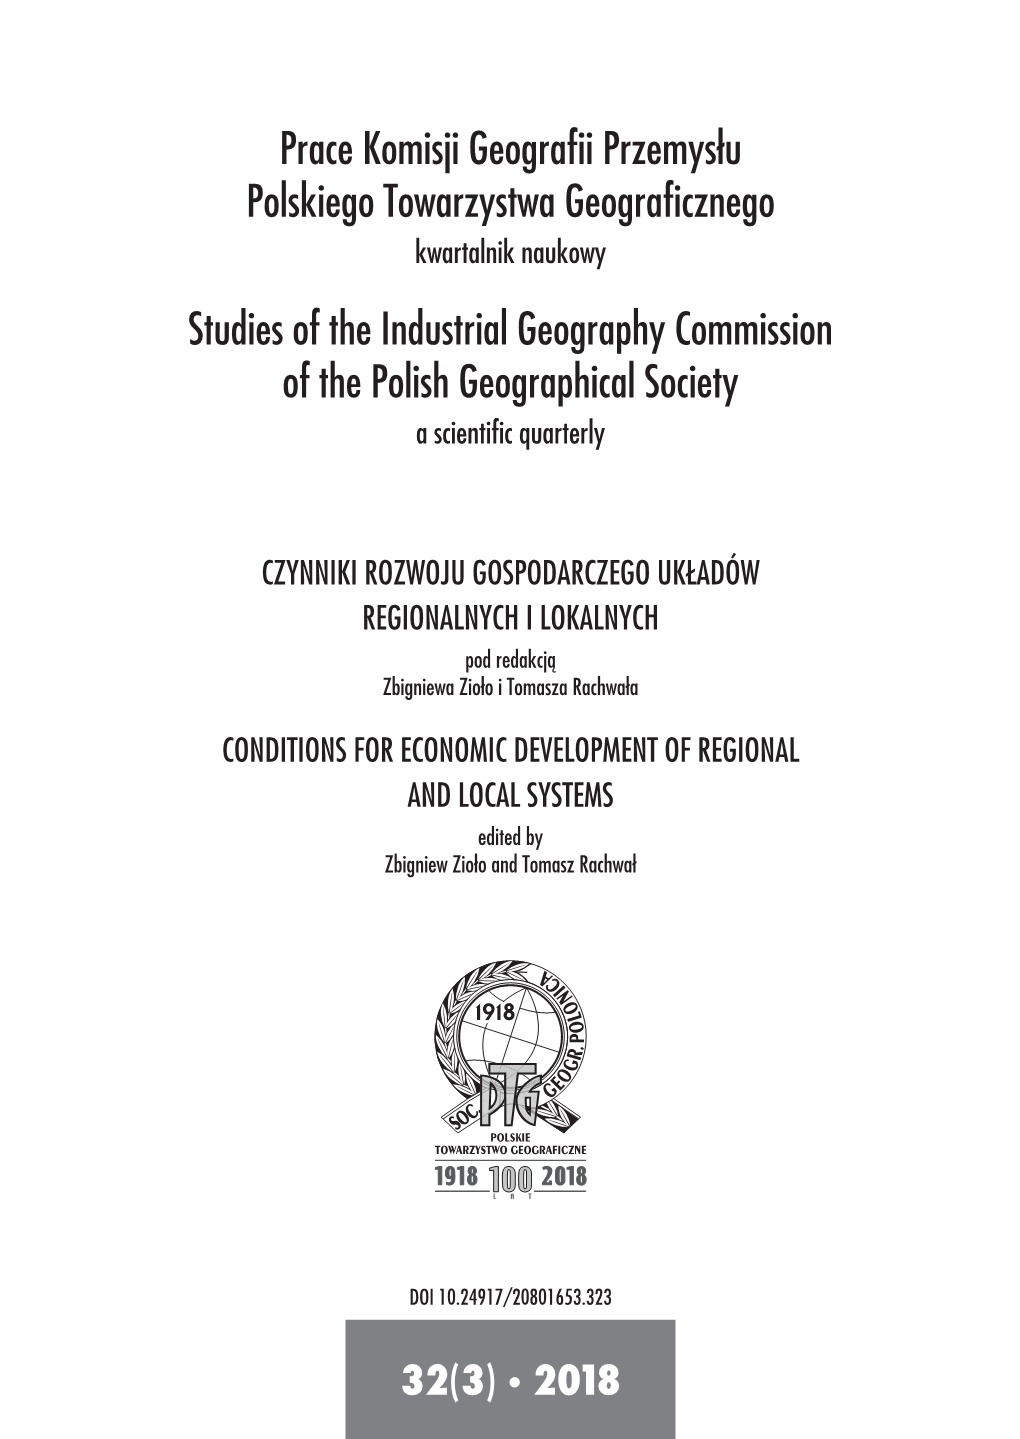 Studies of the Industrial Geography Commission of the Polish Geographical Society a Scientific Quarterly